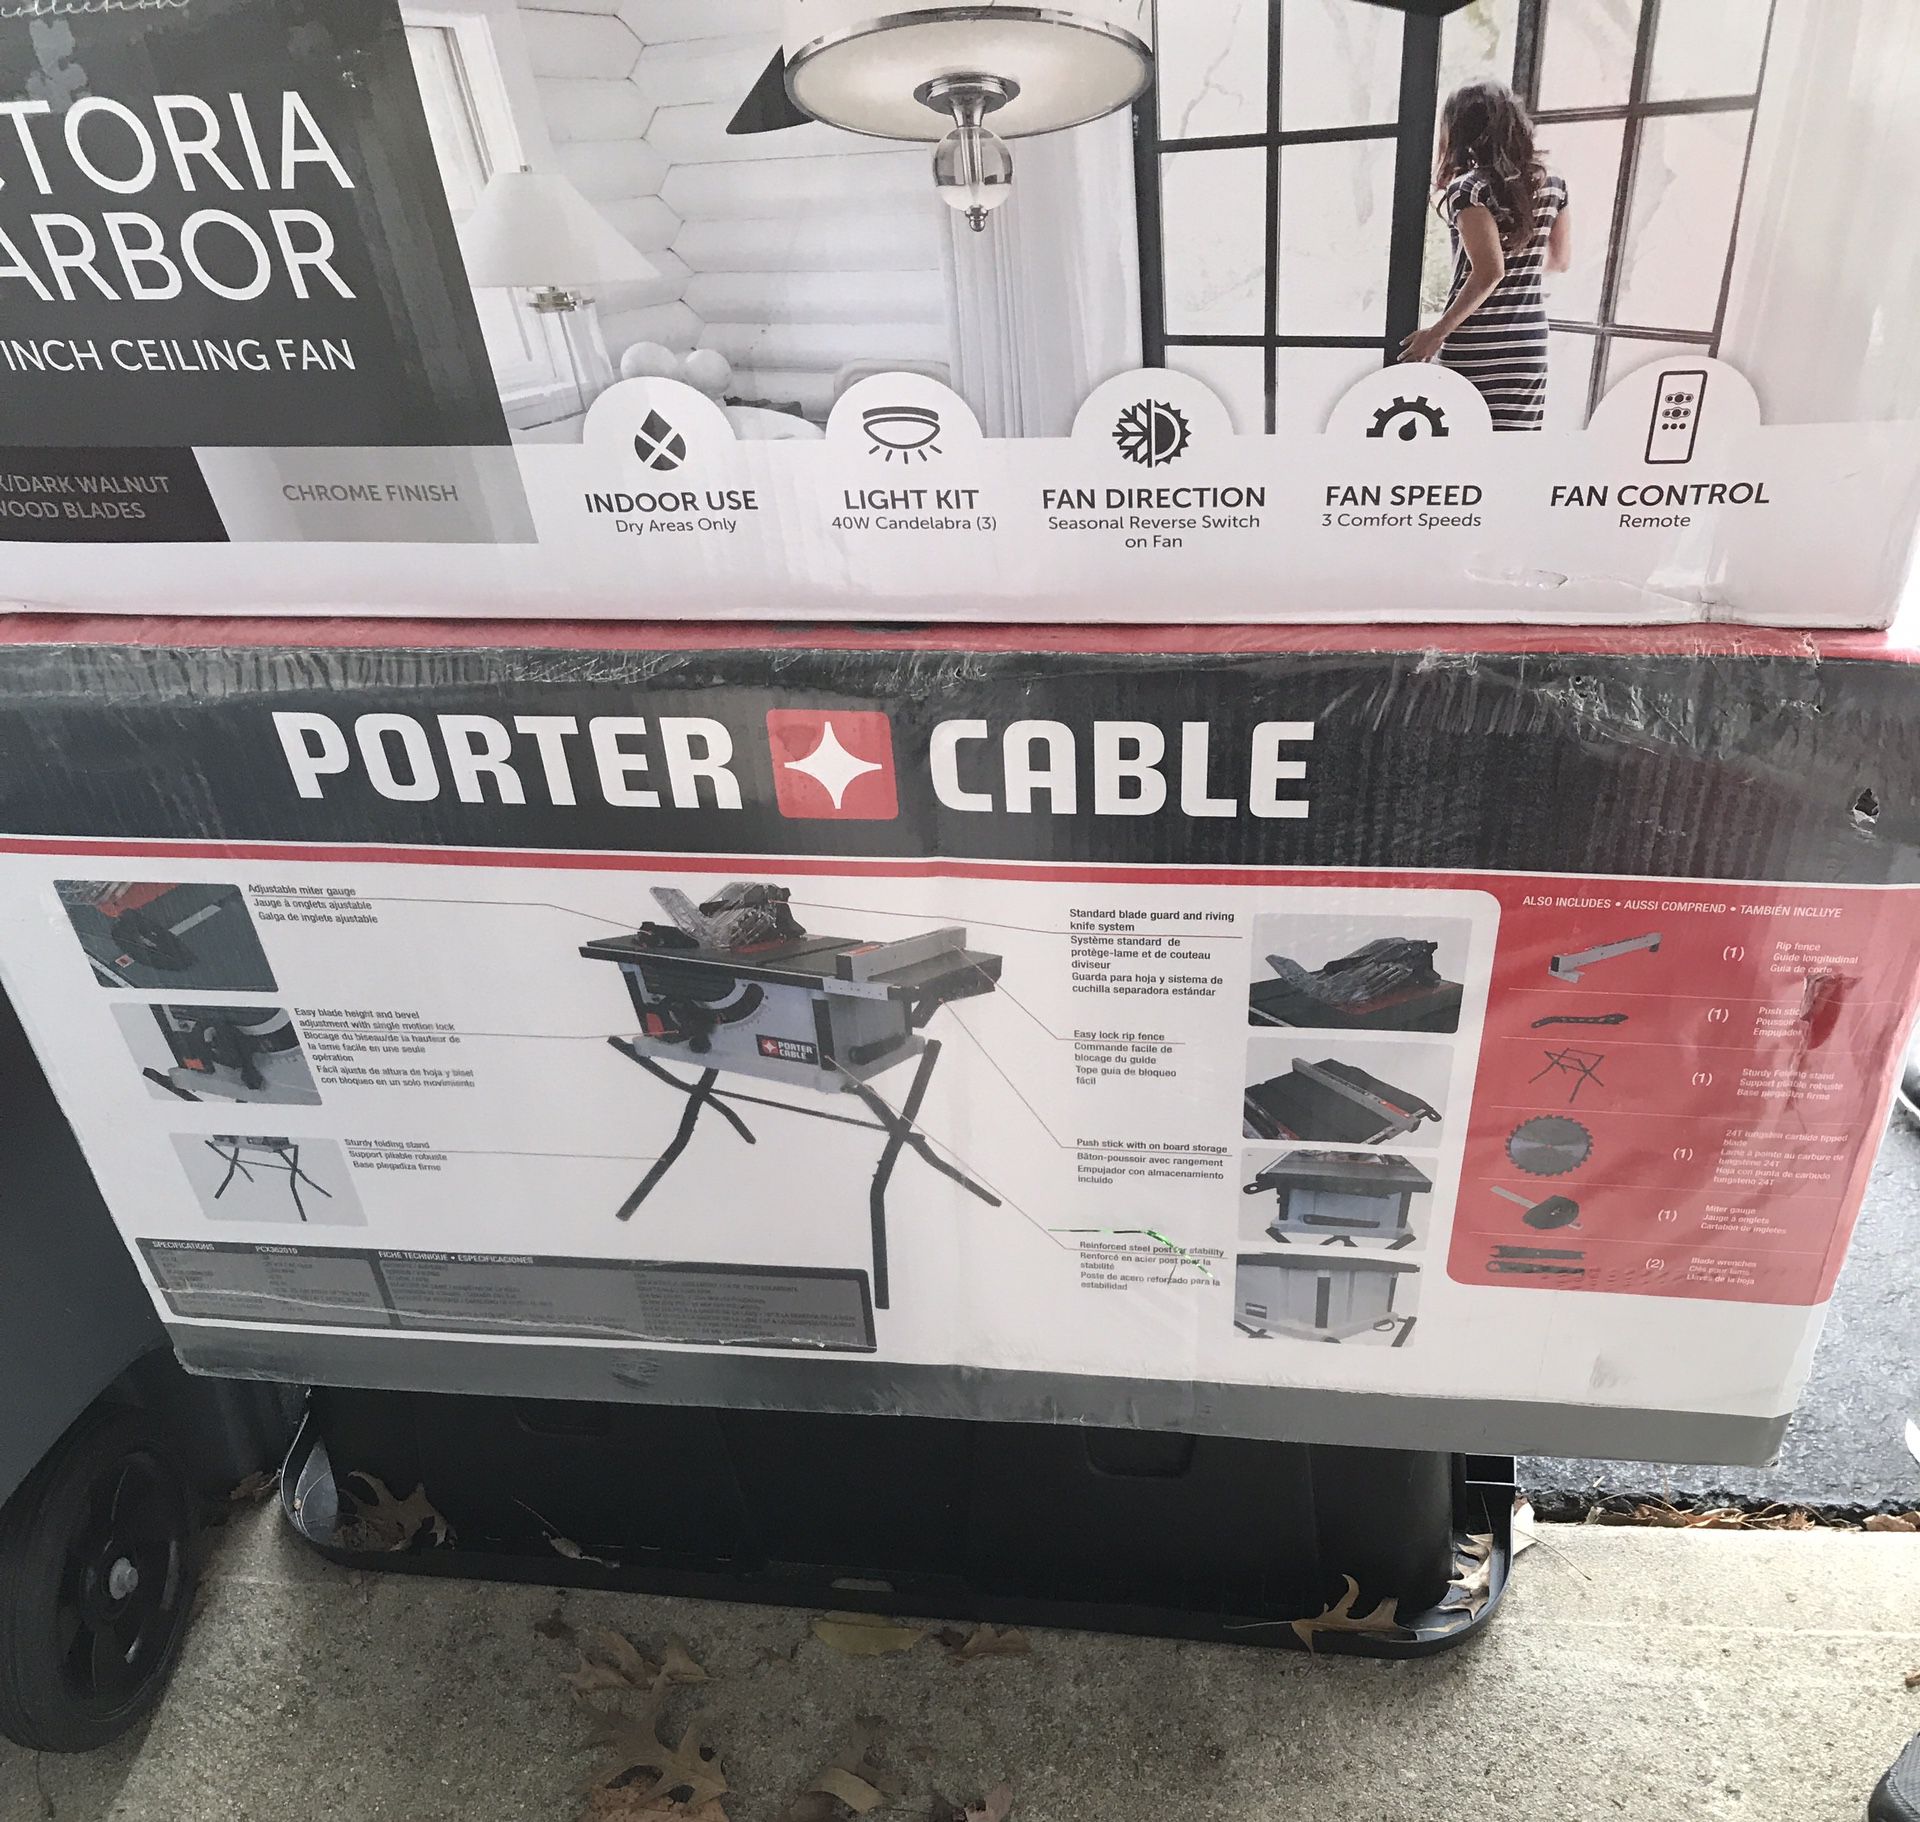 Porter cable table saw the price is 200 thank you!